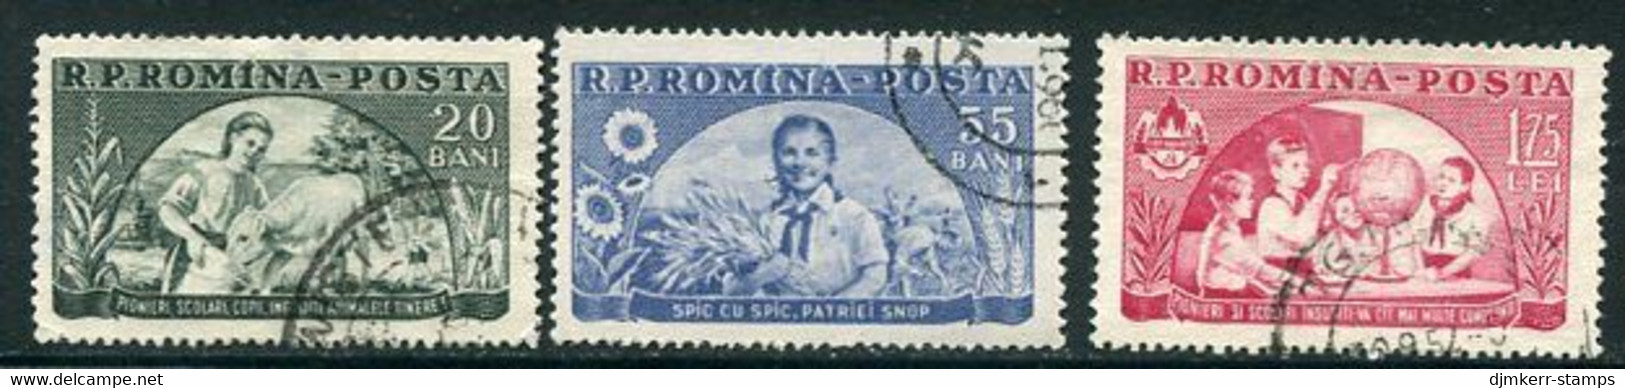 ROMANIA 1954 Young Pioneers Used,  Michel 1474-76 - Usado